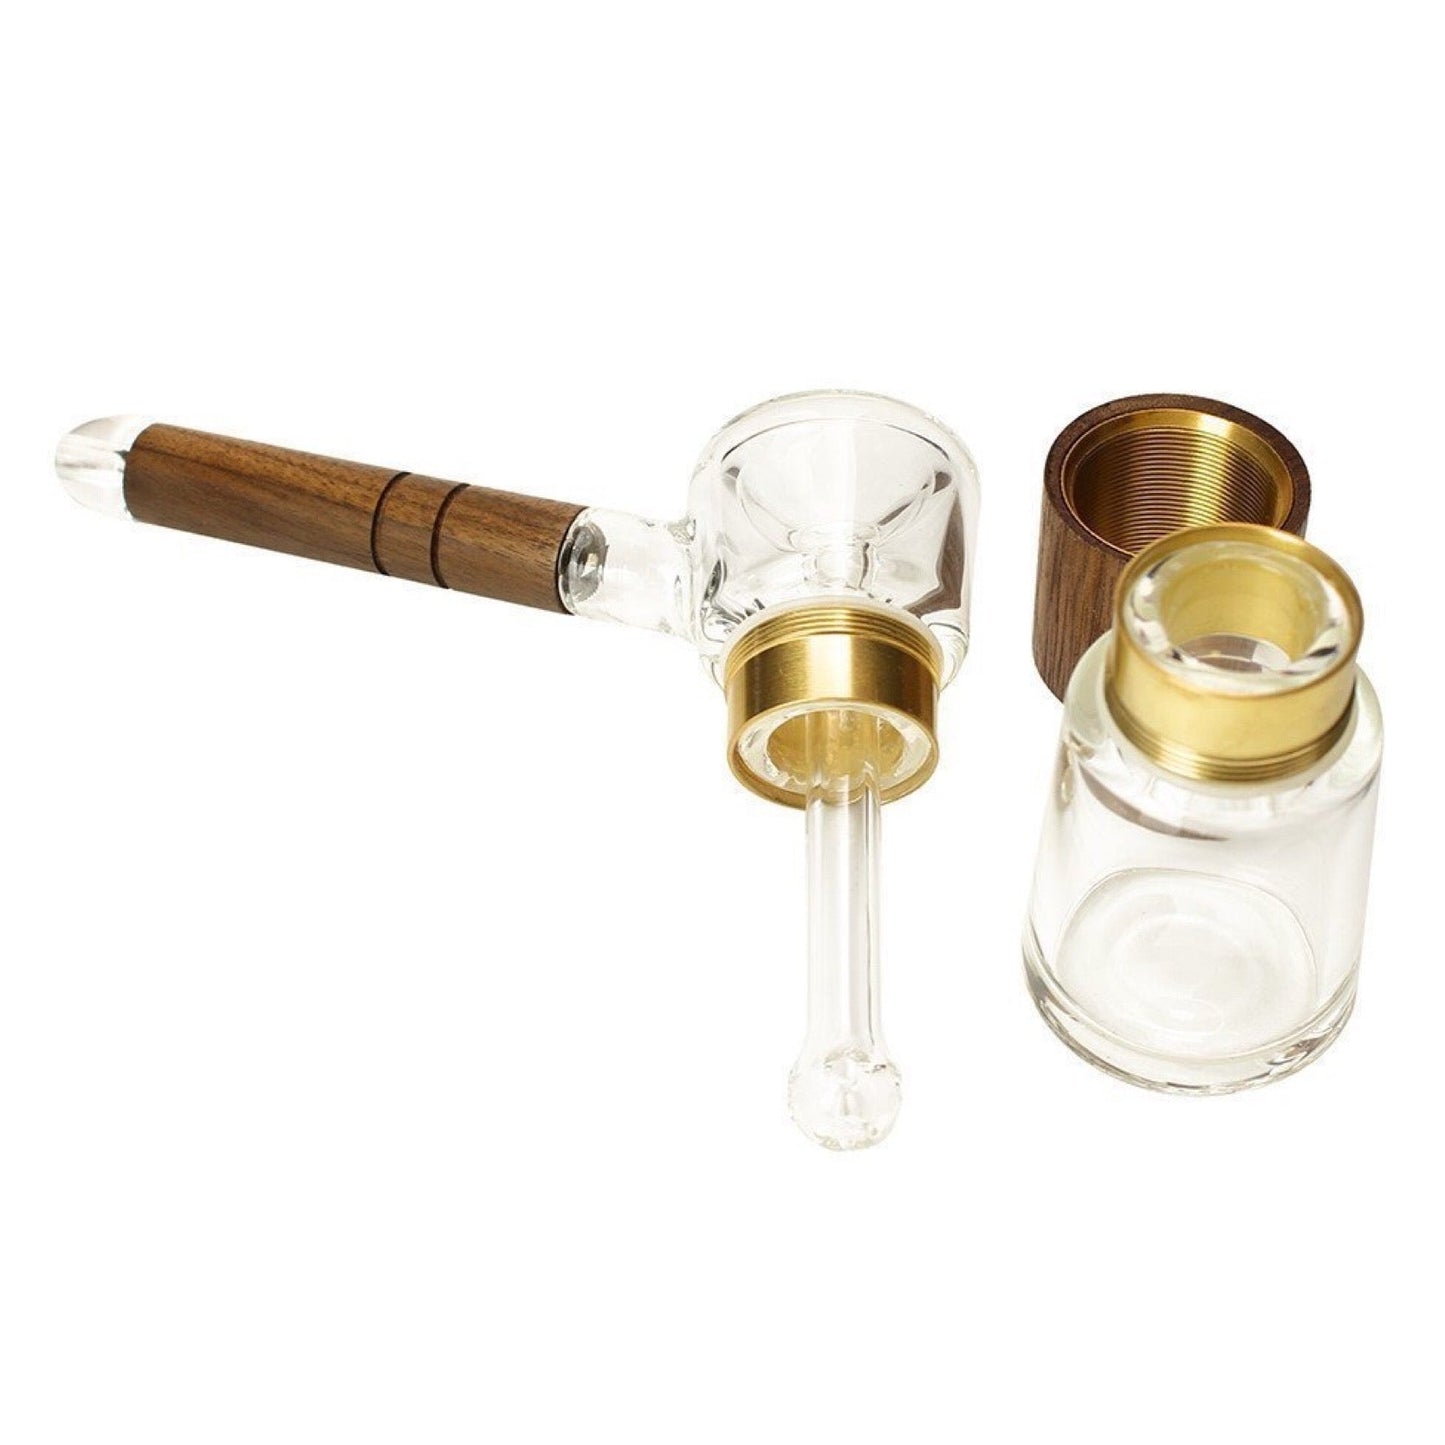 Marley Natural Walnut Bubbler Pipe by Marley Natural | Mission Dispensary